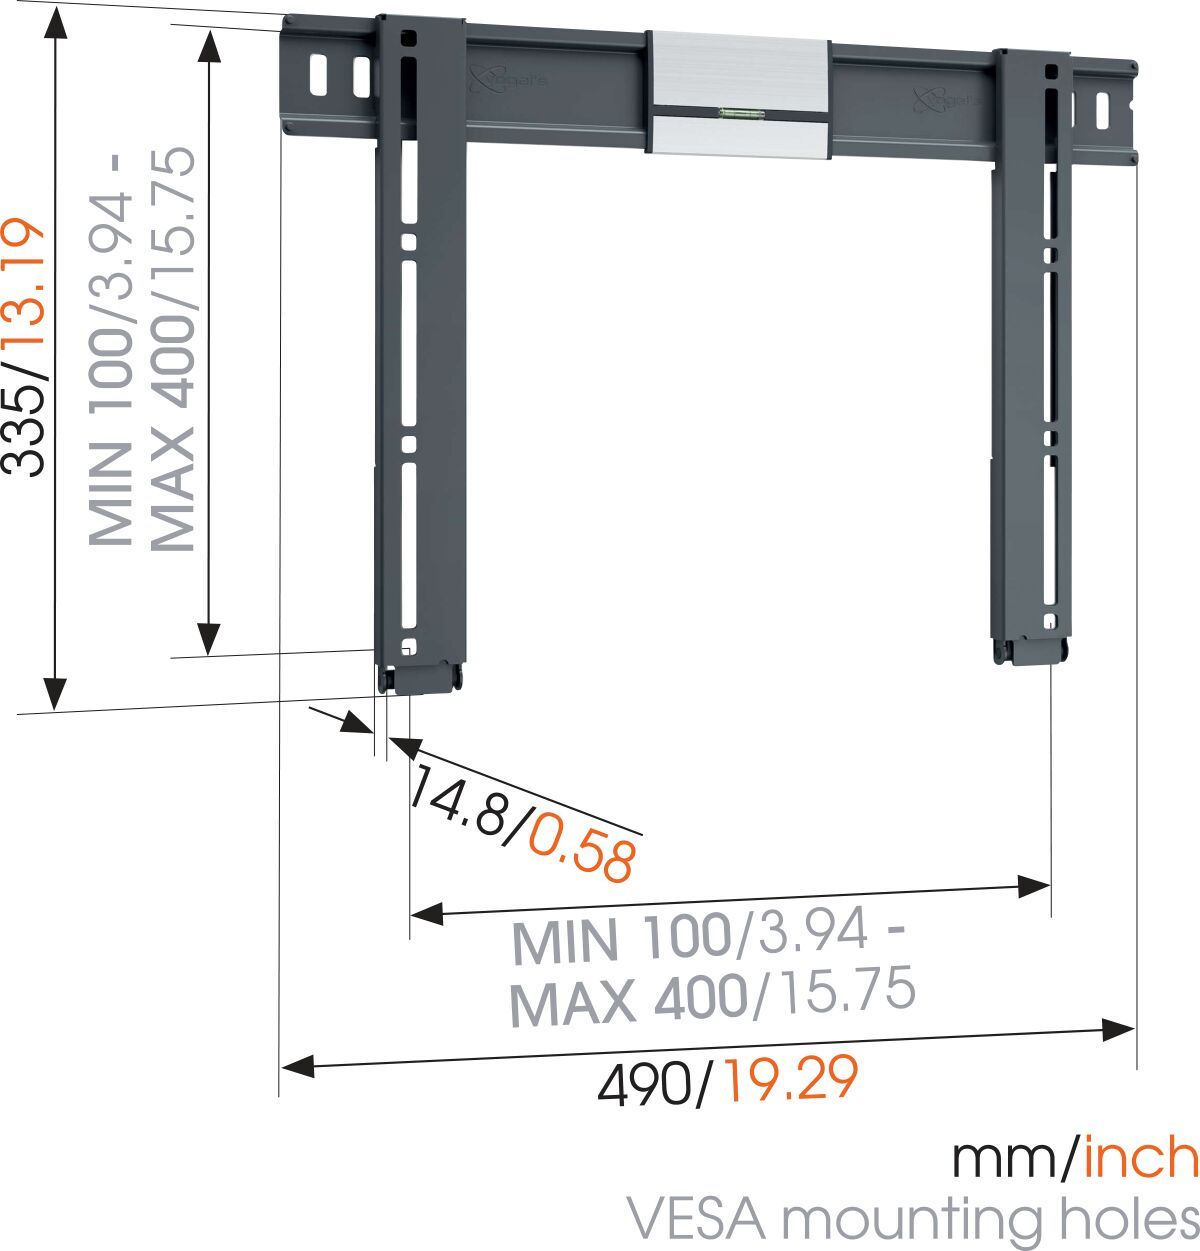 Vogel's THIN 405 ExtraThin Fixed TV Wall Mount - Suitable for 26 up to 55 inch TVs up to Dimensions